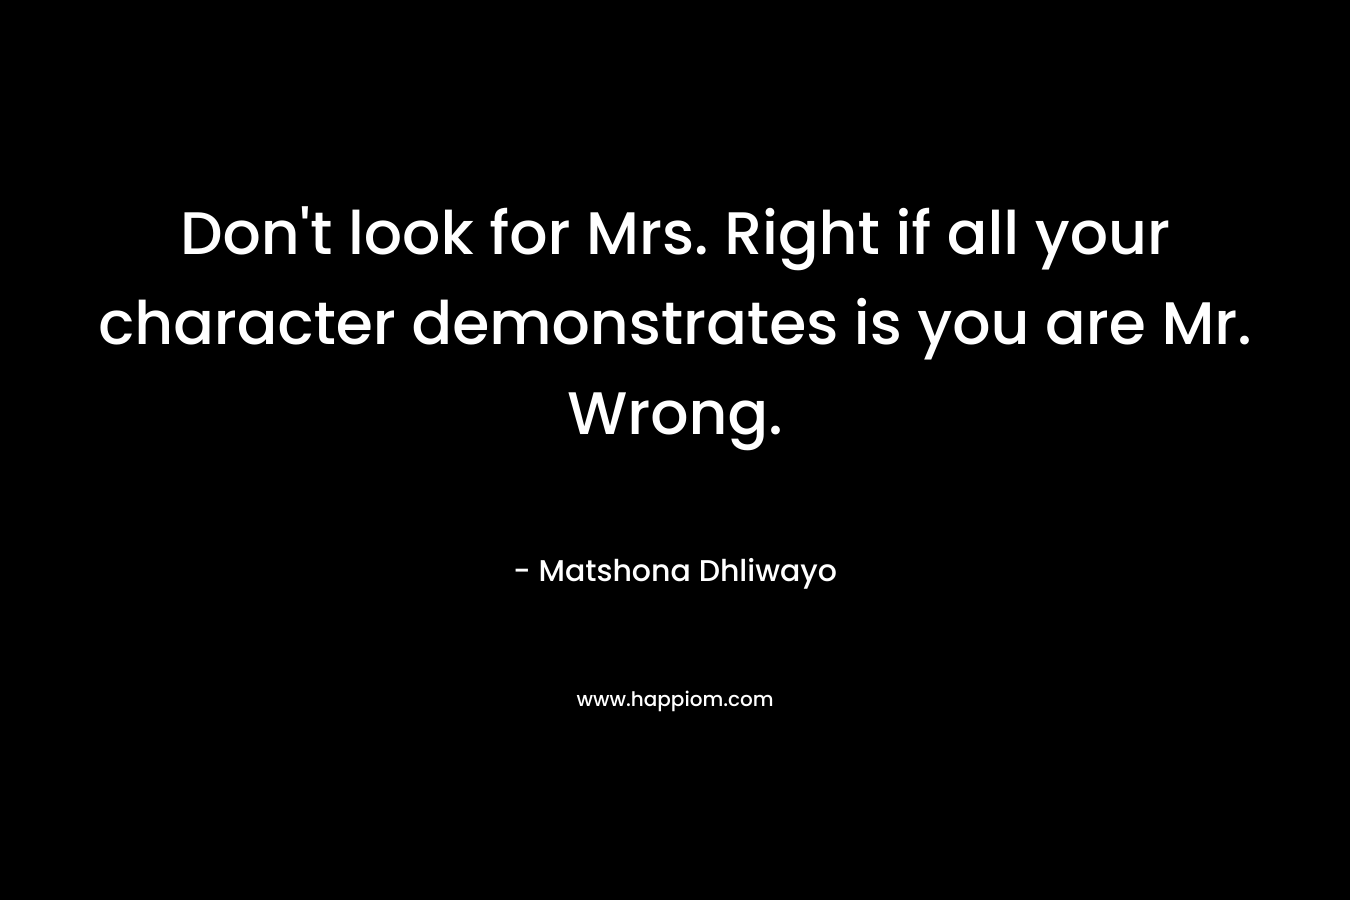 Don’t look for Mrs. Right if all your character demonstrates is you are Mr. Wrong. – Matshona Dhliwayo